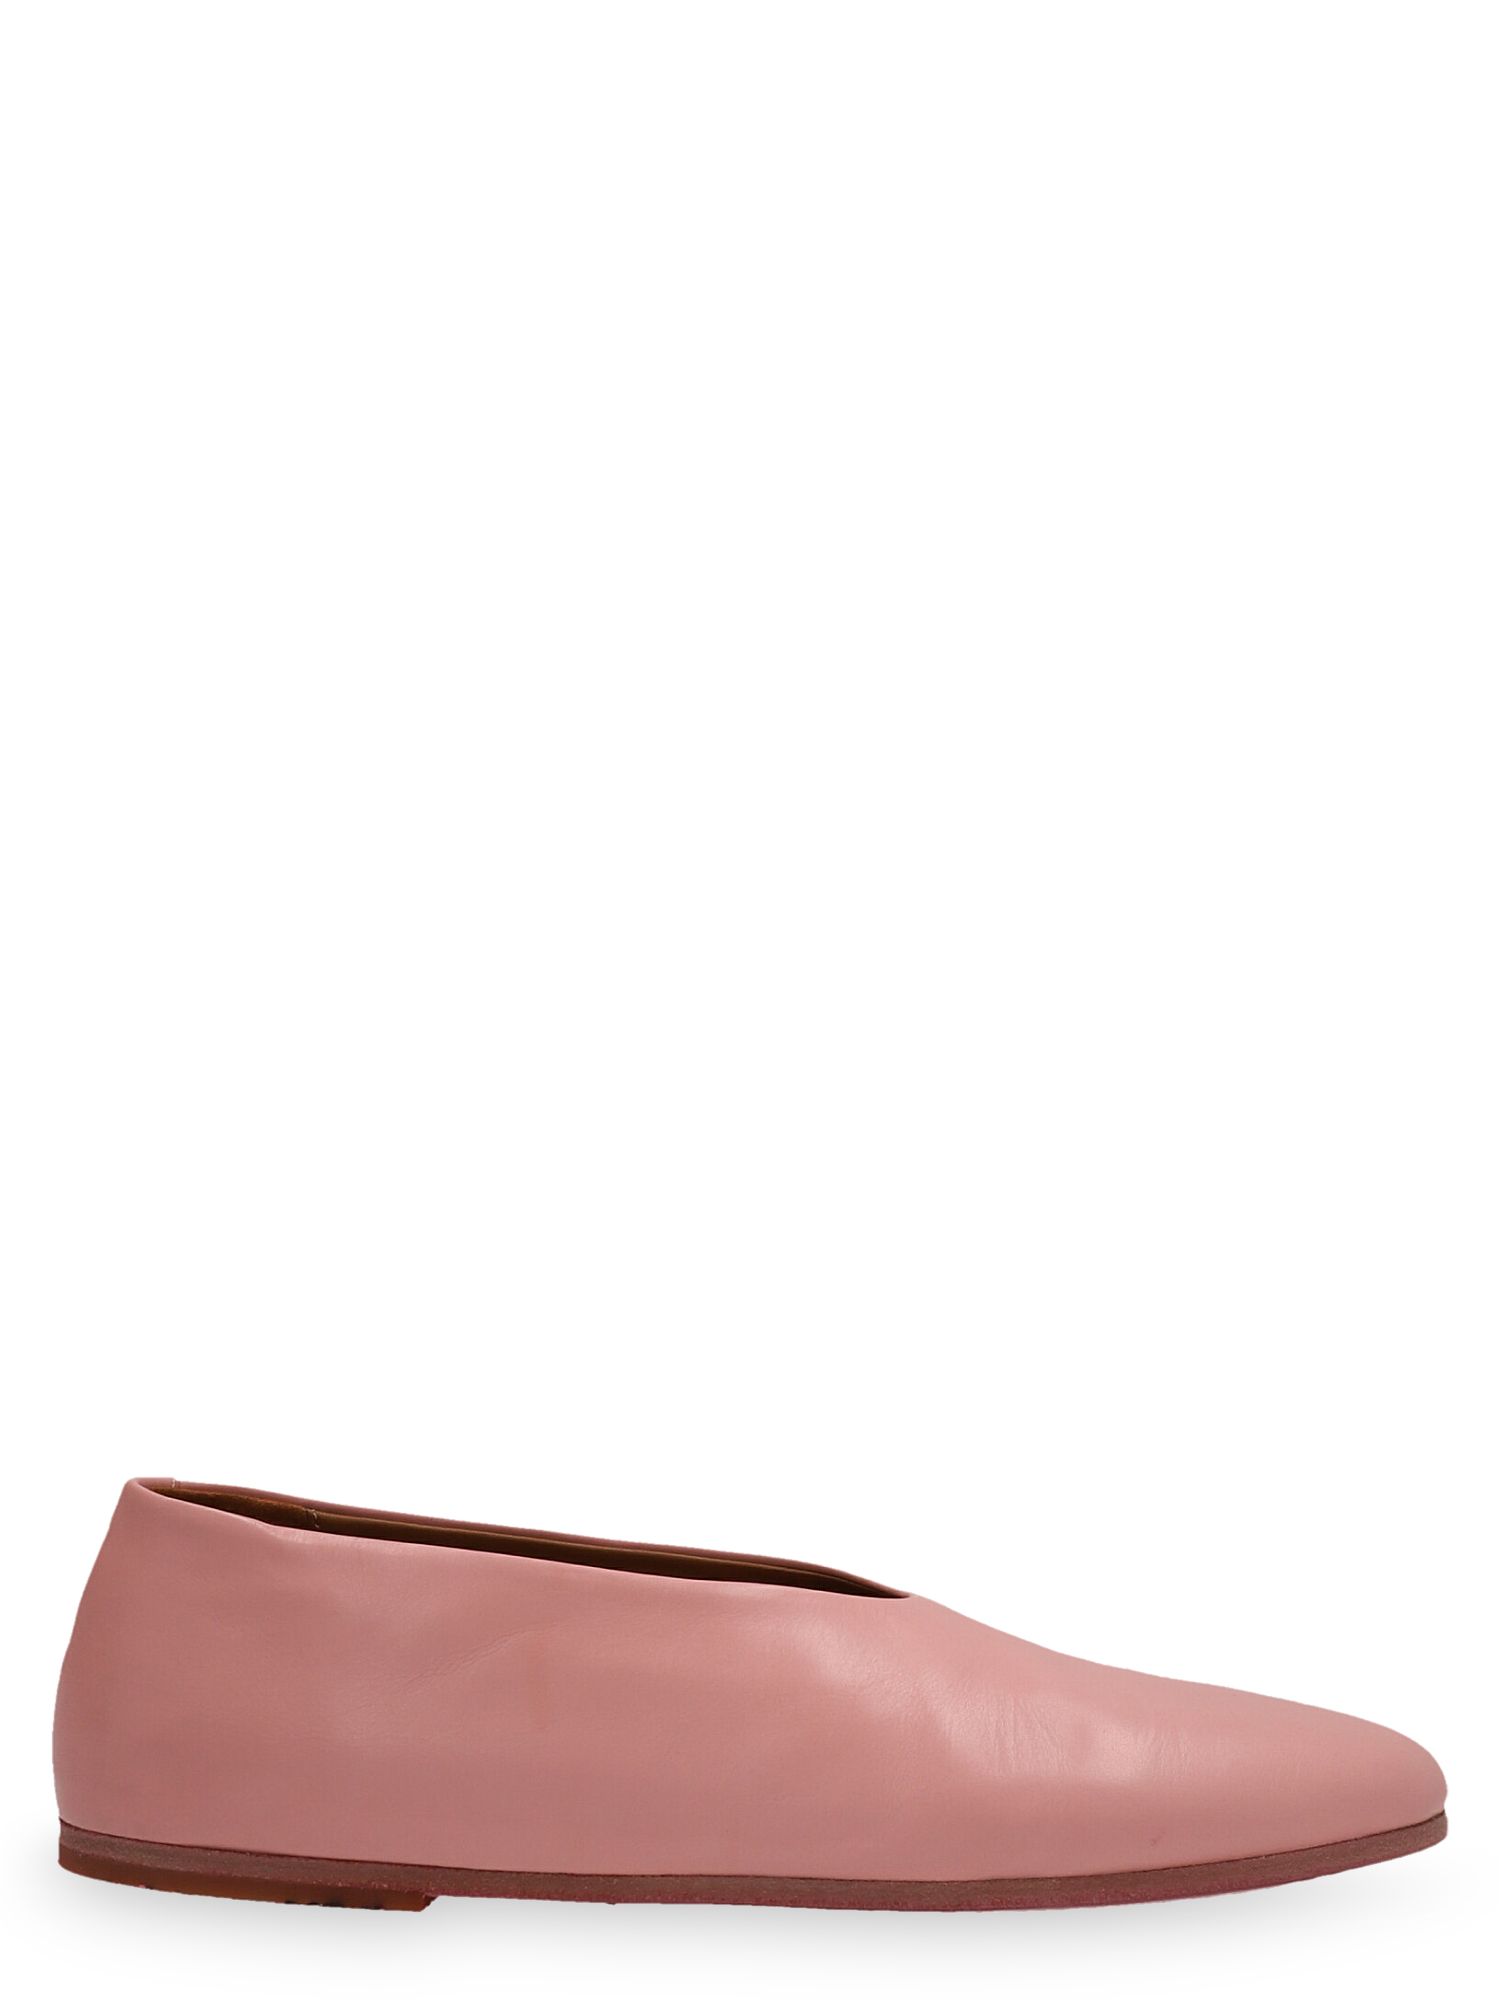 Ballerines Pour Femme - Marsell - En Leather Pink - Taille: IT 36 - EU 36